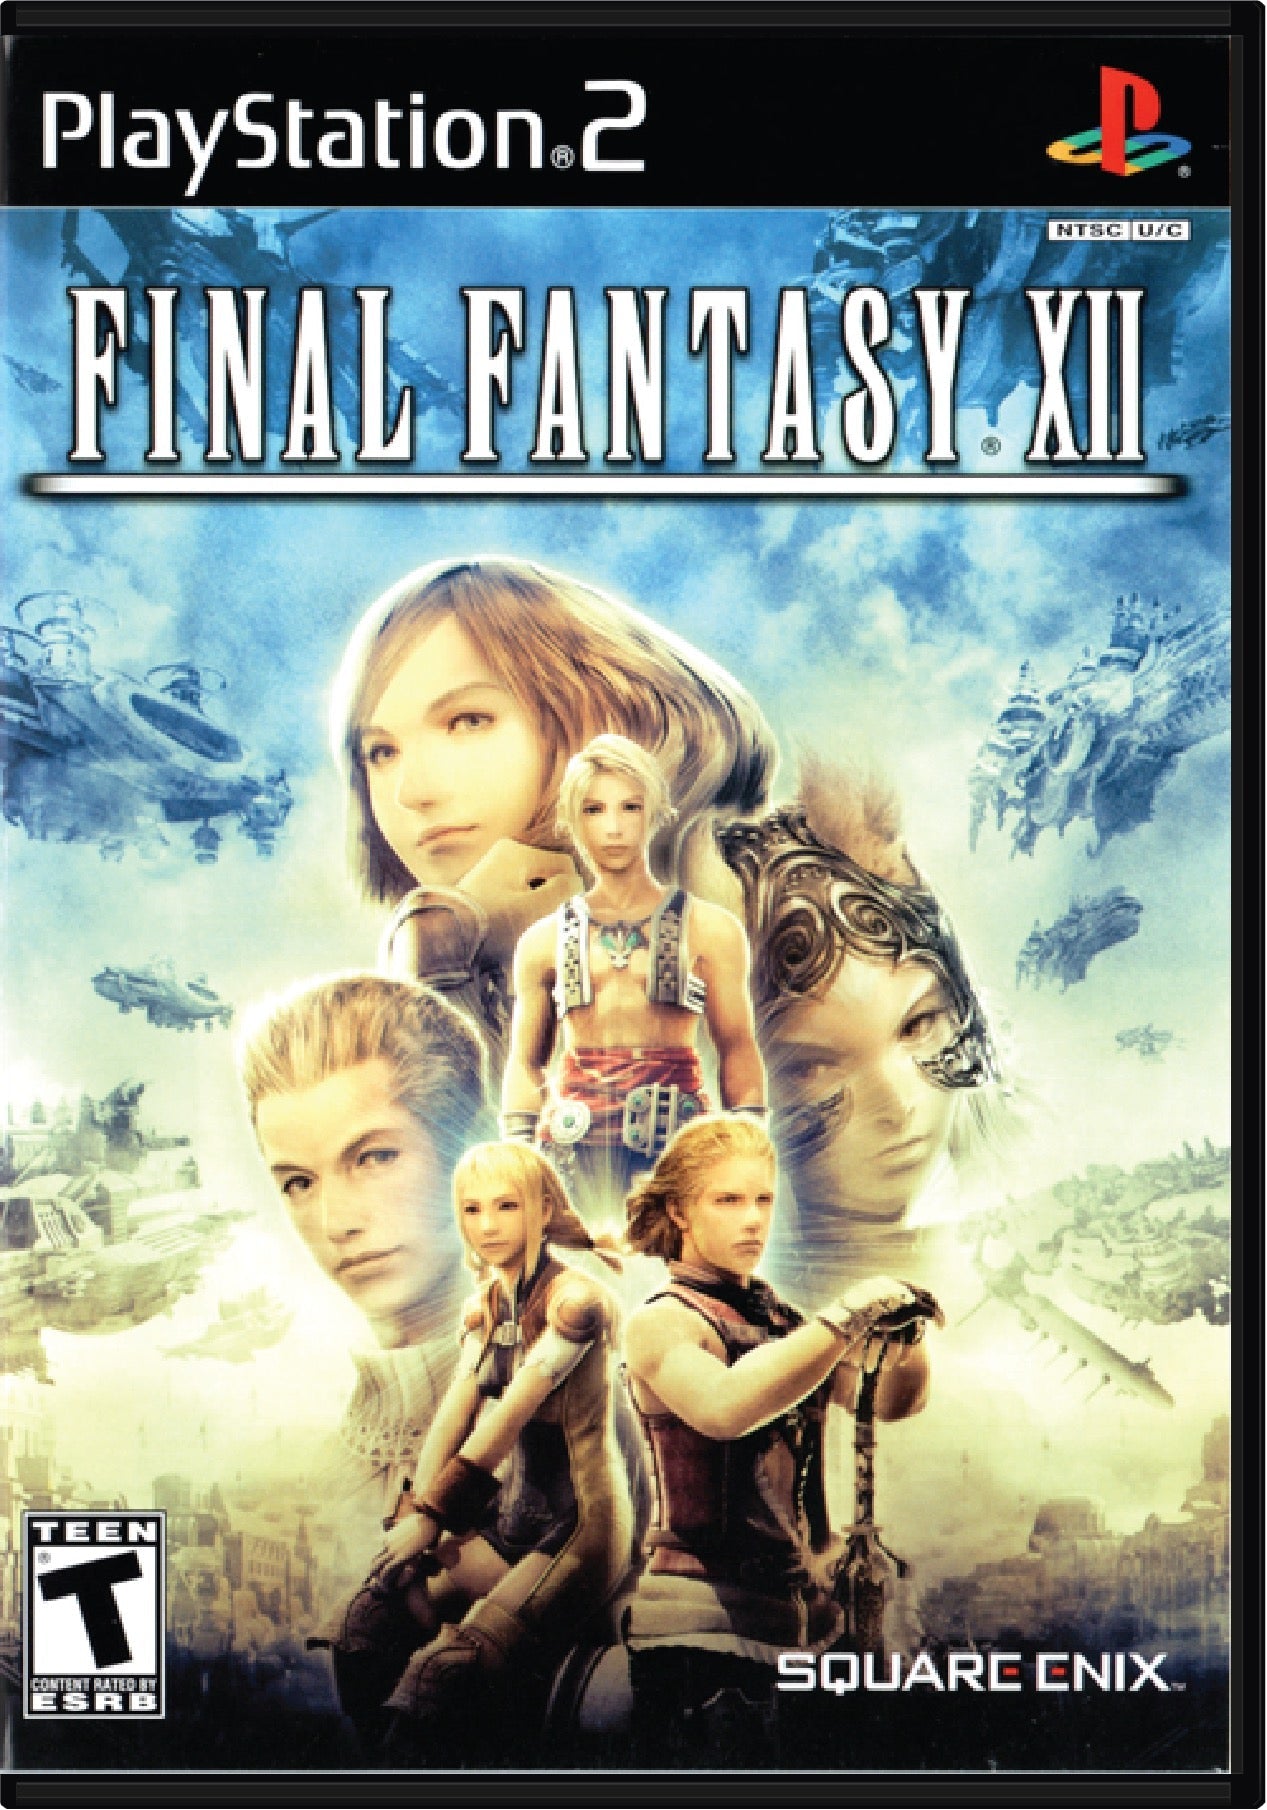 Final Fantasy XII Cover Art and Product Photo